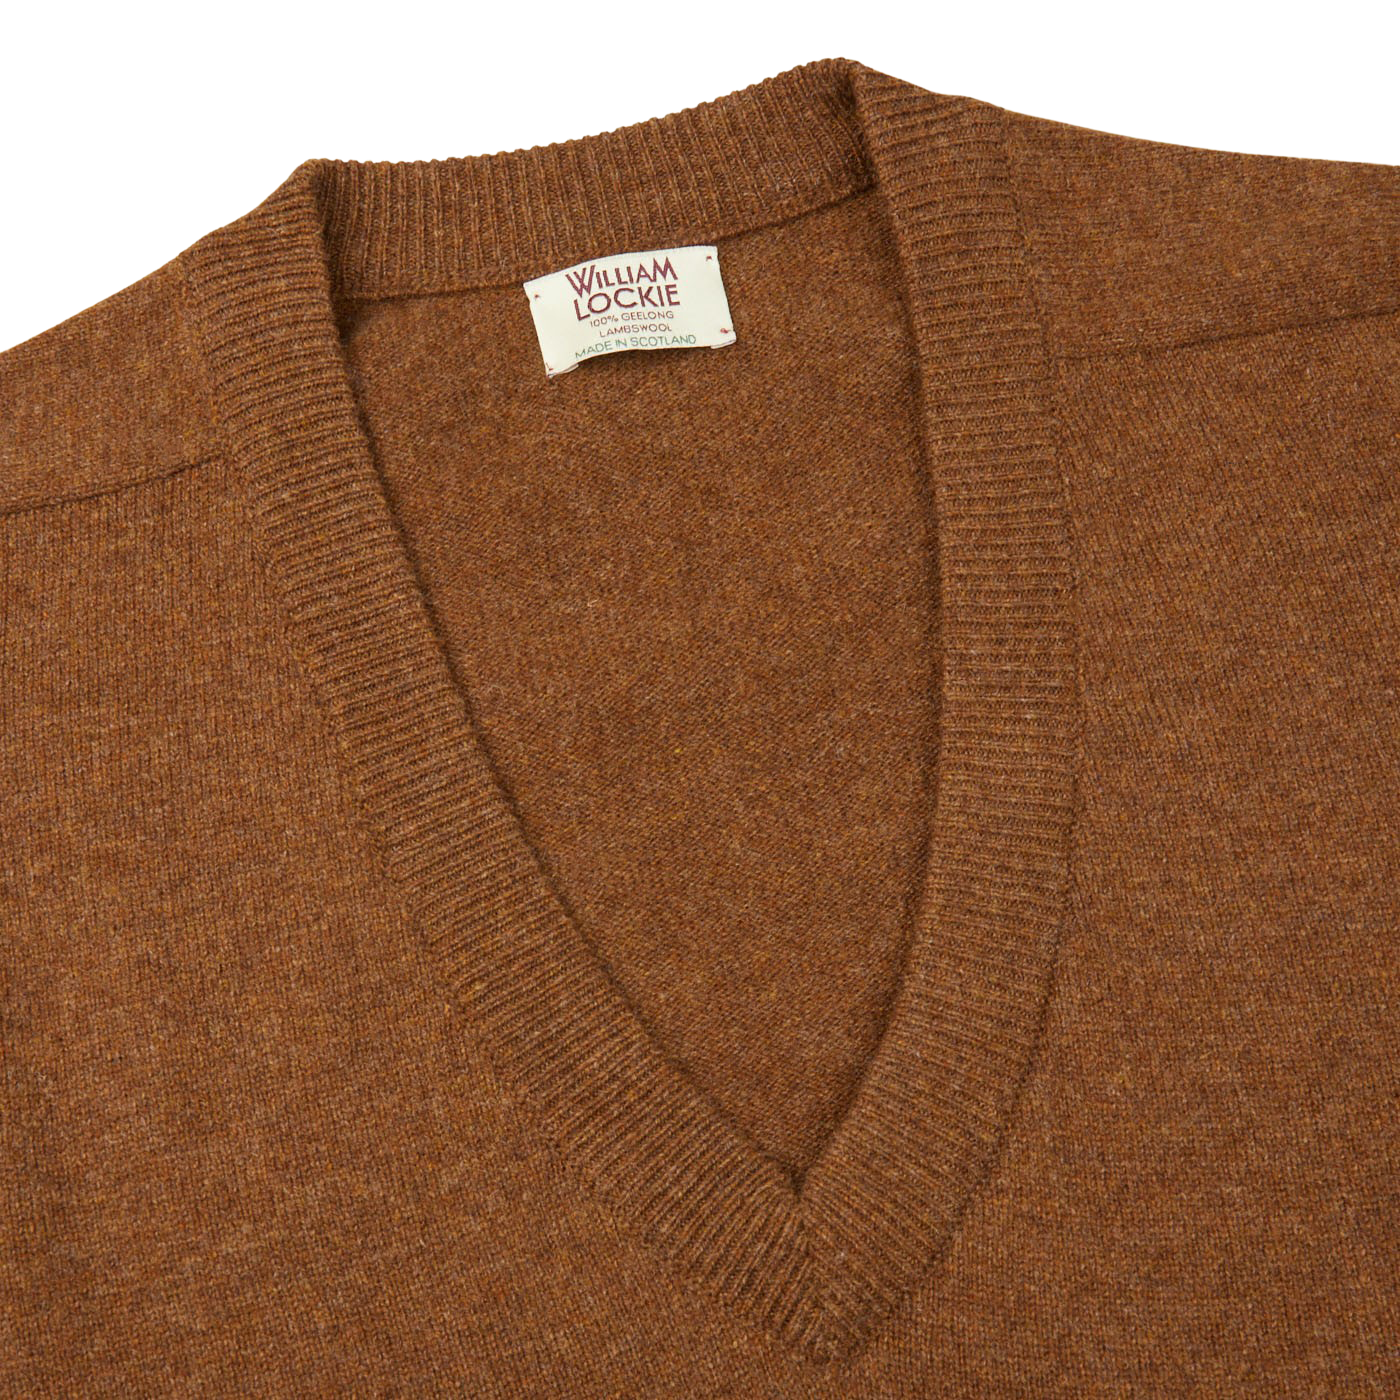 A William Lockie Kestrel Brown Deep V-Neck Lambswool Sweater with a label on it.